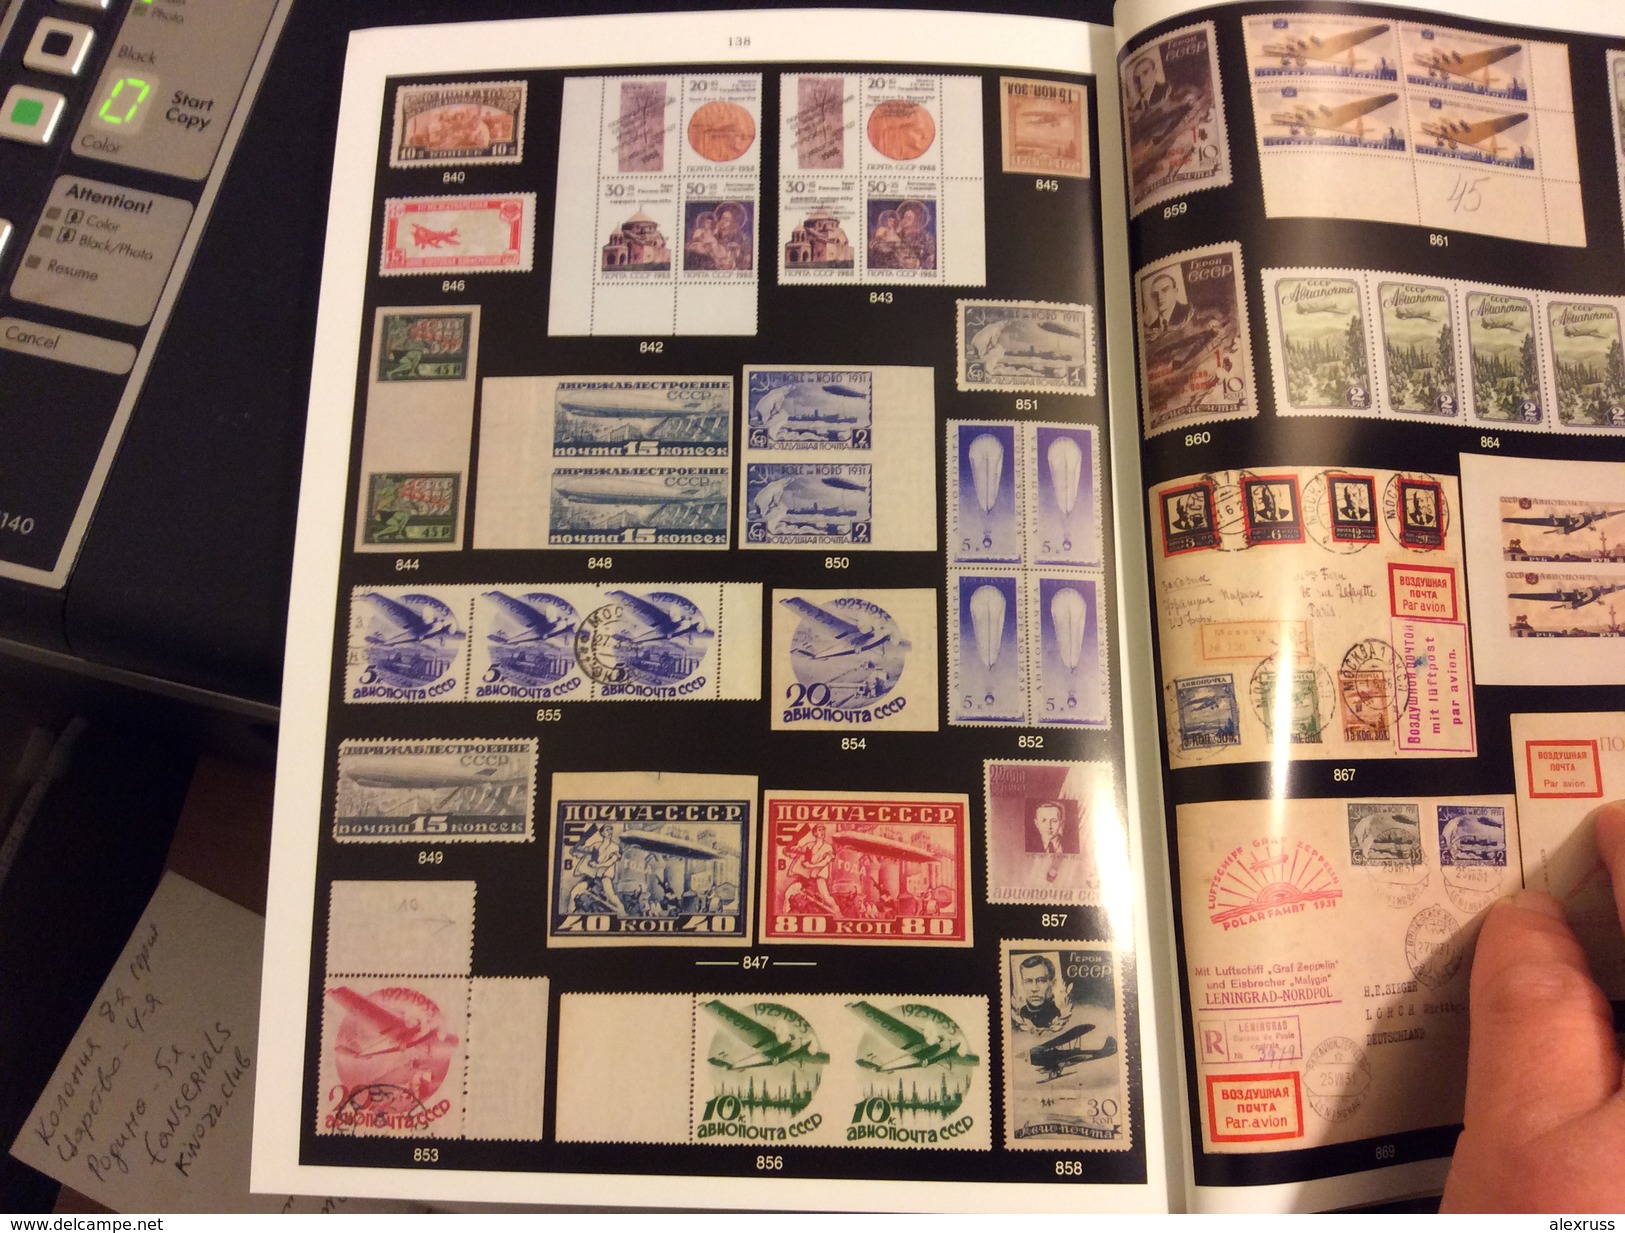 Raritan Stamps Auction 71,Dec 2016 Catalog Of Rare Russia Stamps,Errors & Worldwide Rarities - Catalogues For Auction Houses